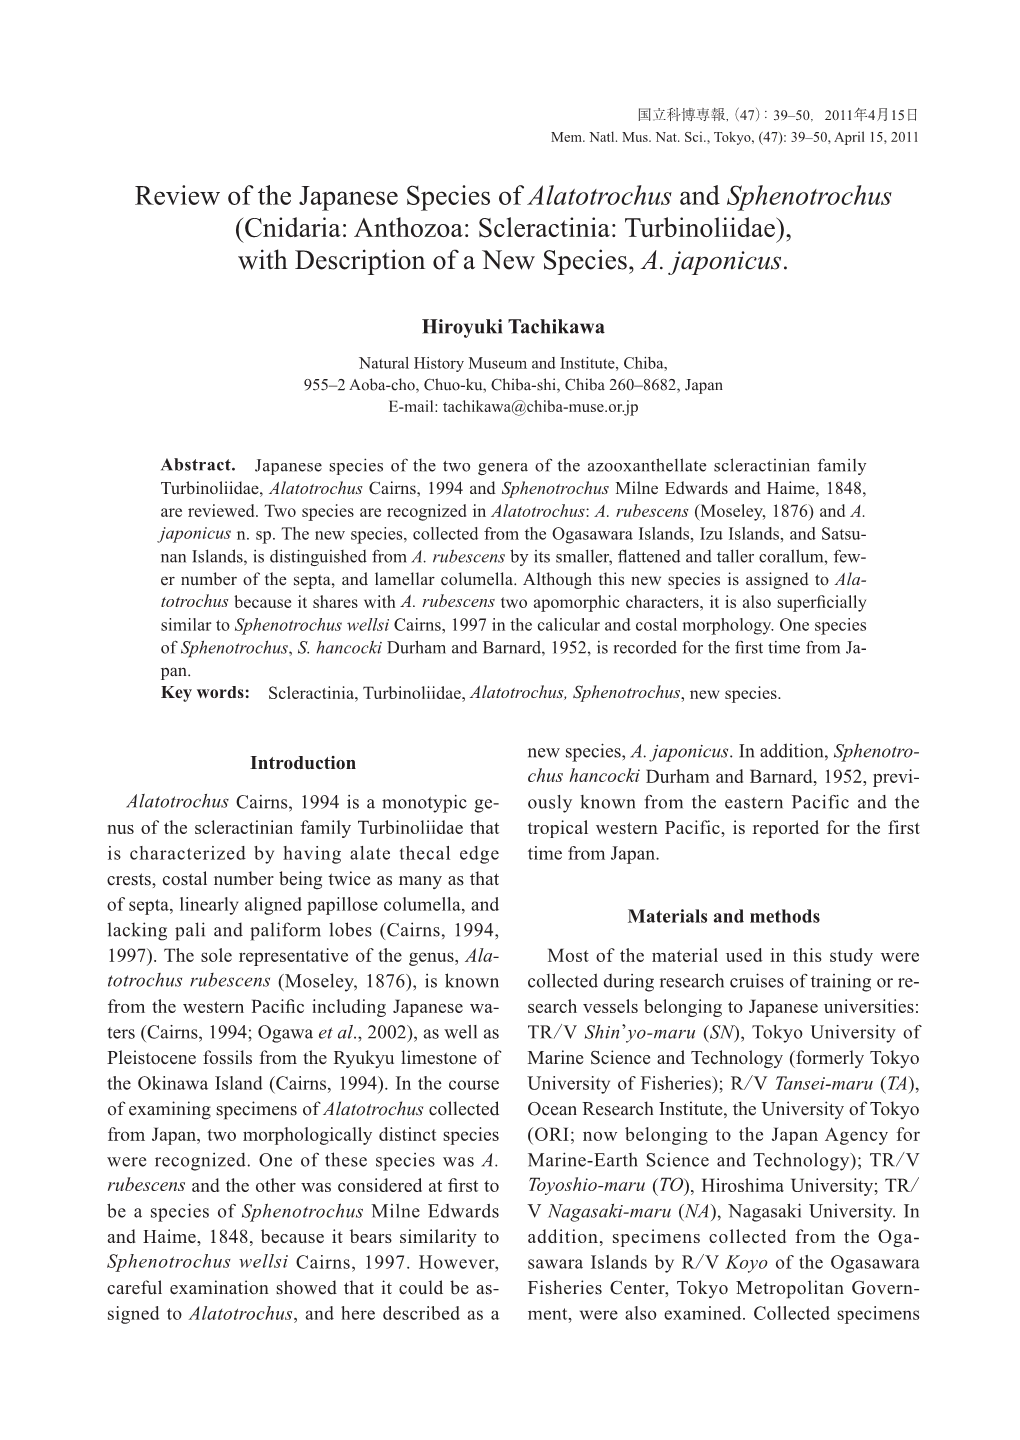 Review of the Japanese Species of Alatotrochus and Sphenotrochus (Cnidaria: Anthozoa: Scleractinia: Turbinoliidae), with Description of a New Species, A